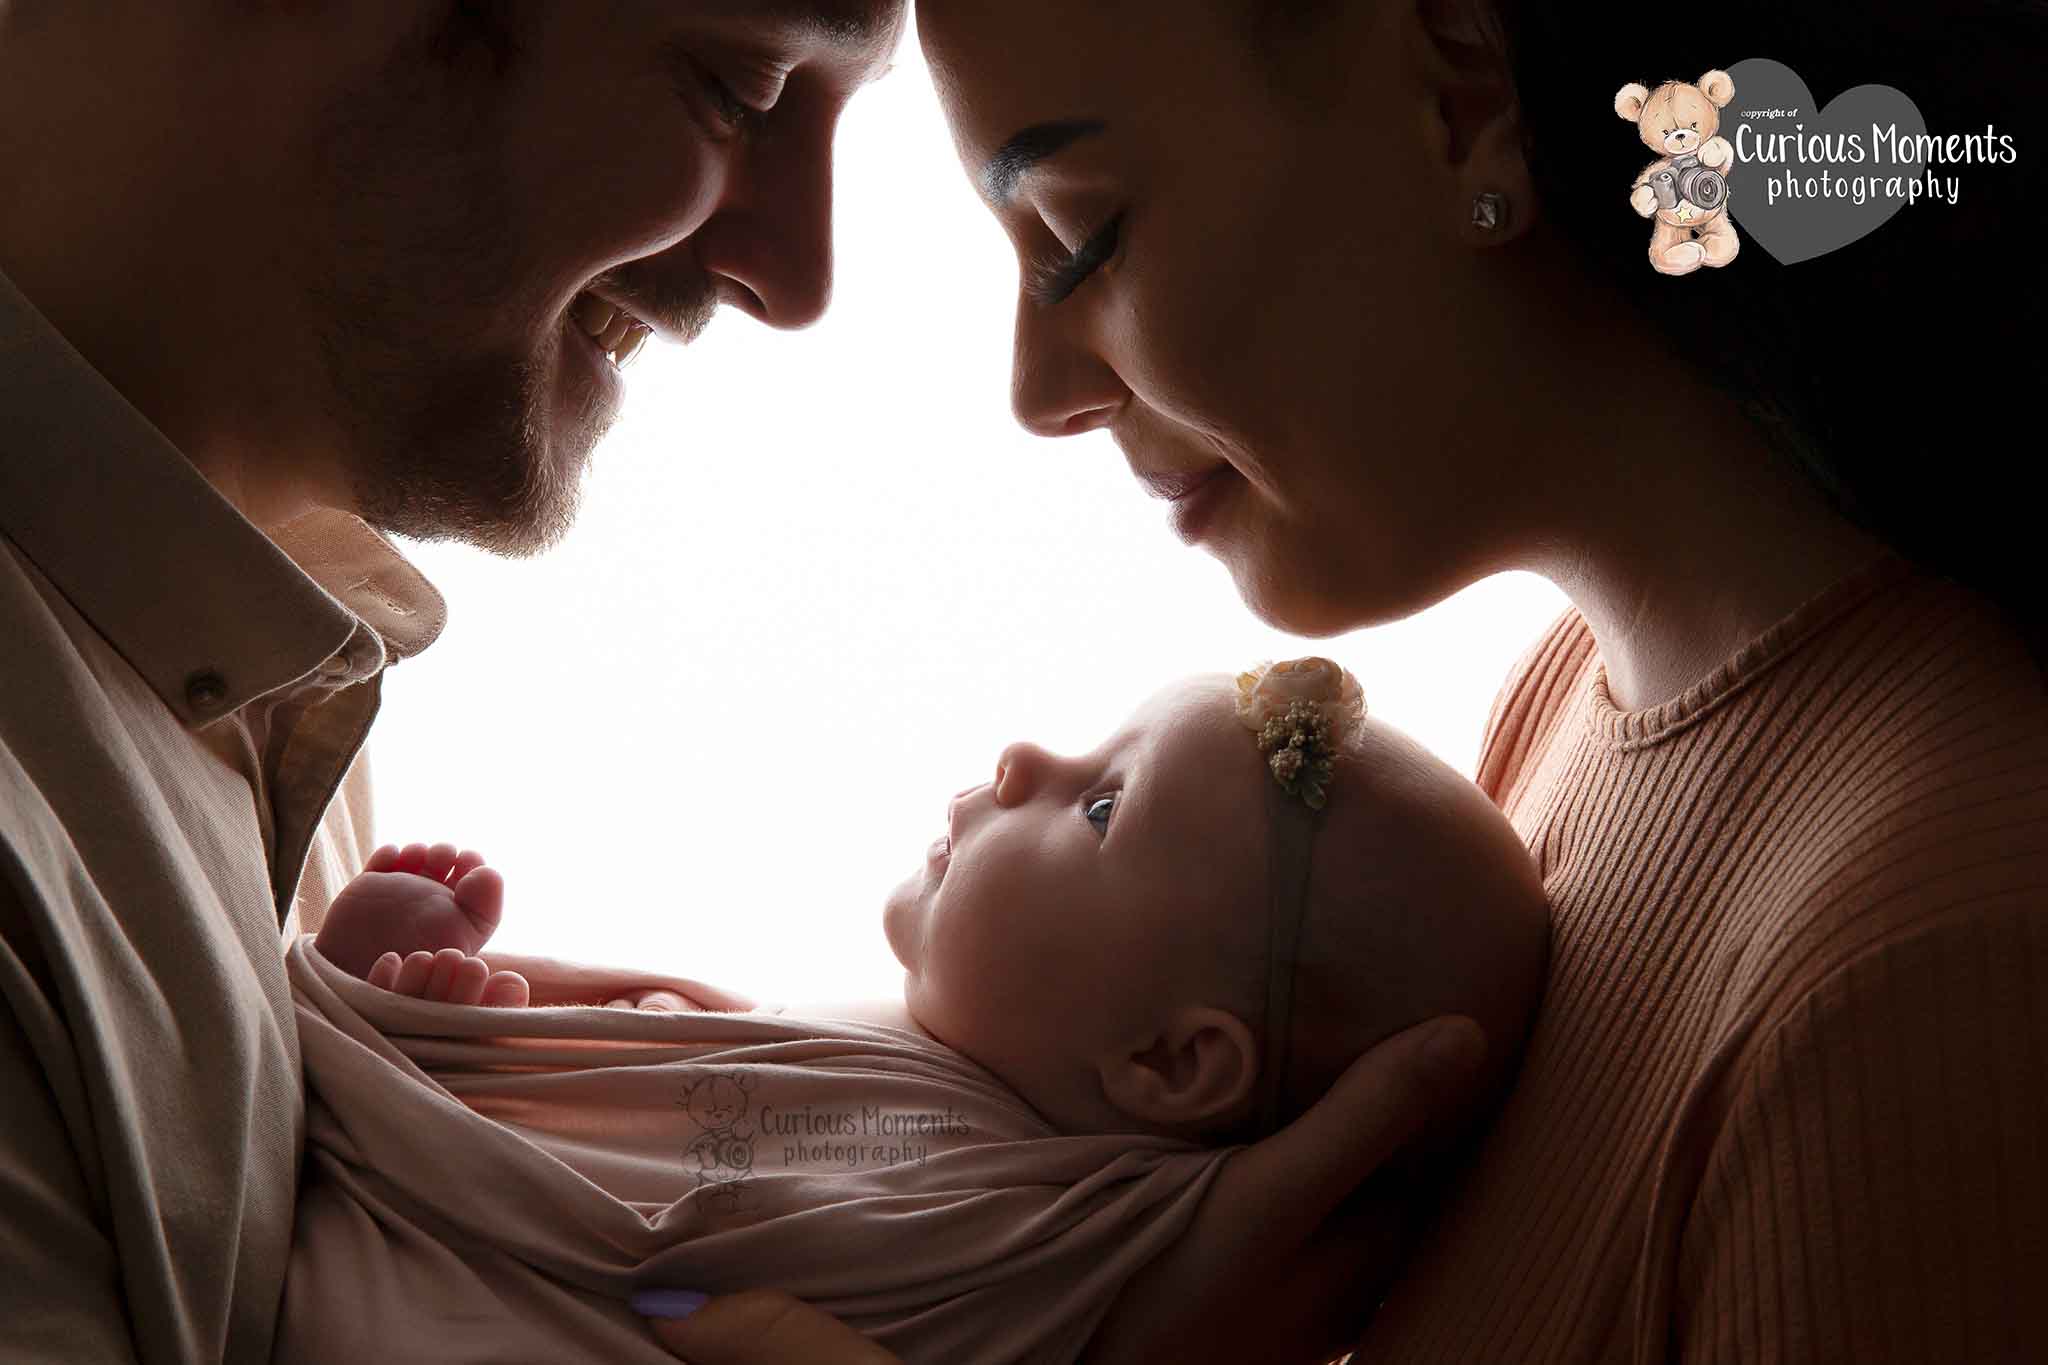 Backlit image of new parents looking down at their new baby girl by Curious moments photography